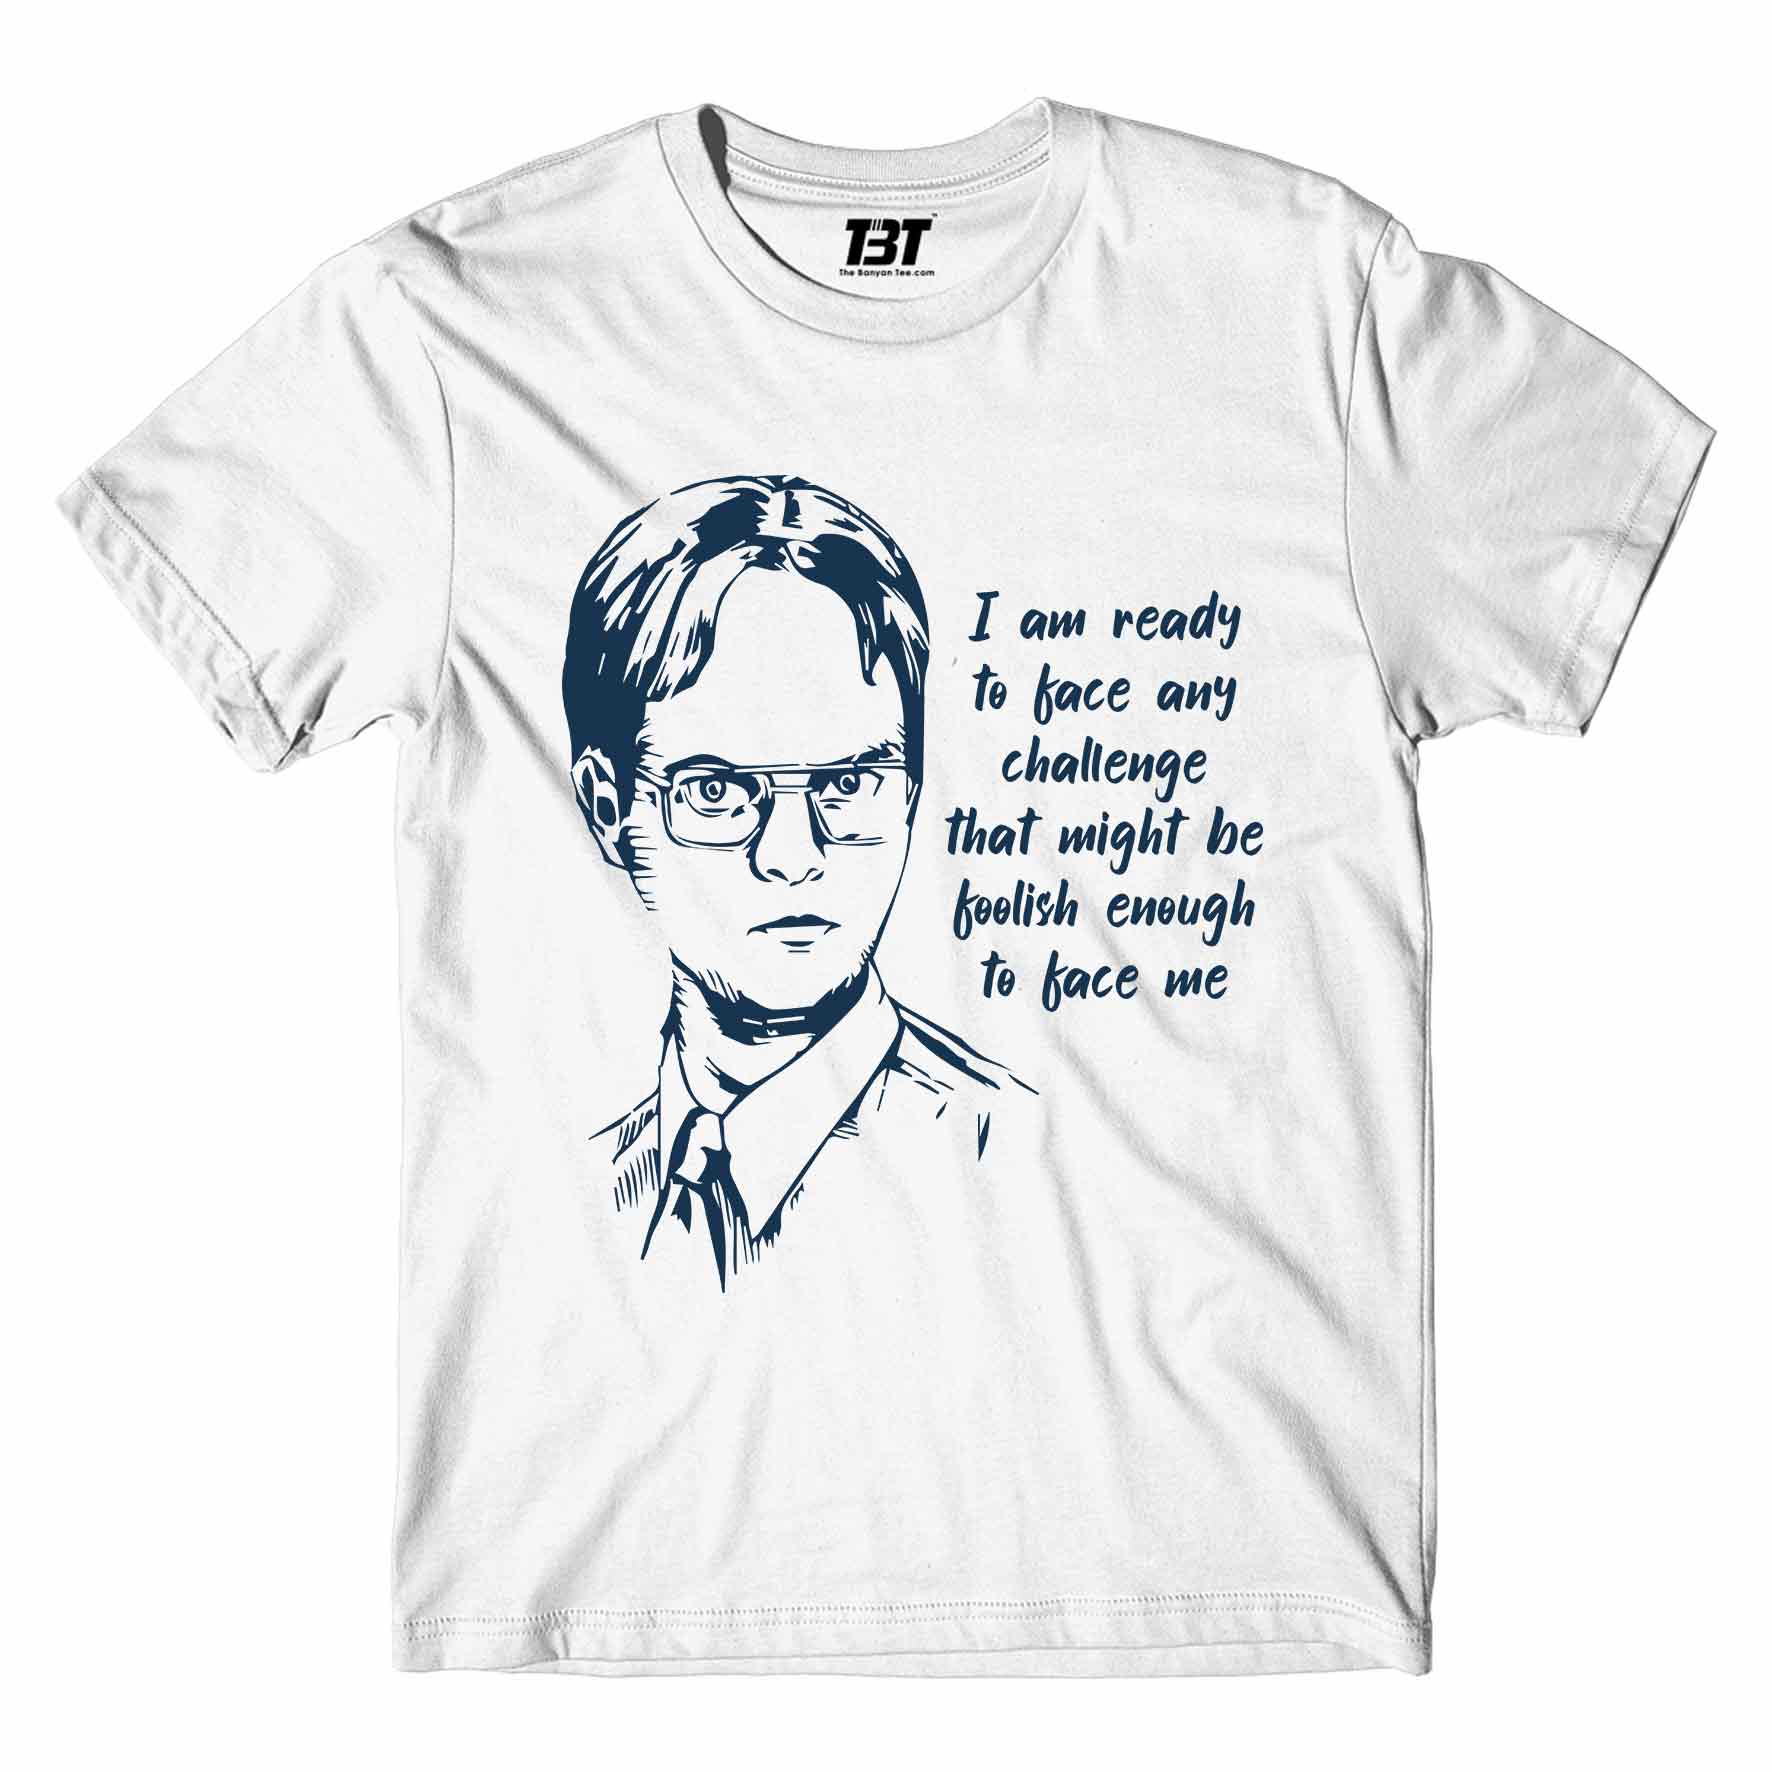 the office dwight t-shirt tv & movies buy online united states usa the banyan tee tbt men women girls boys unisex white - i am ready to face any challenge